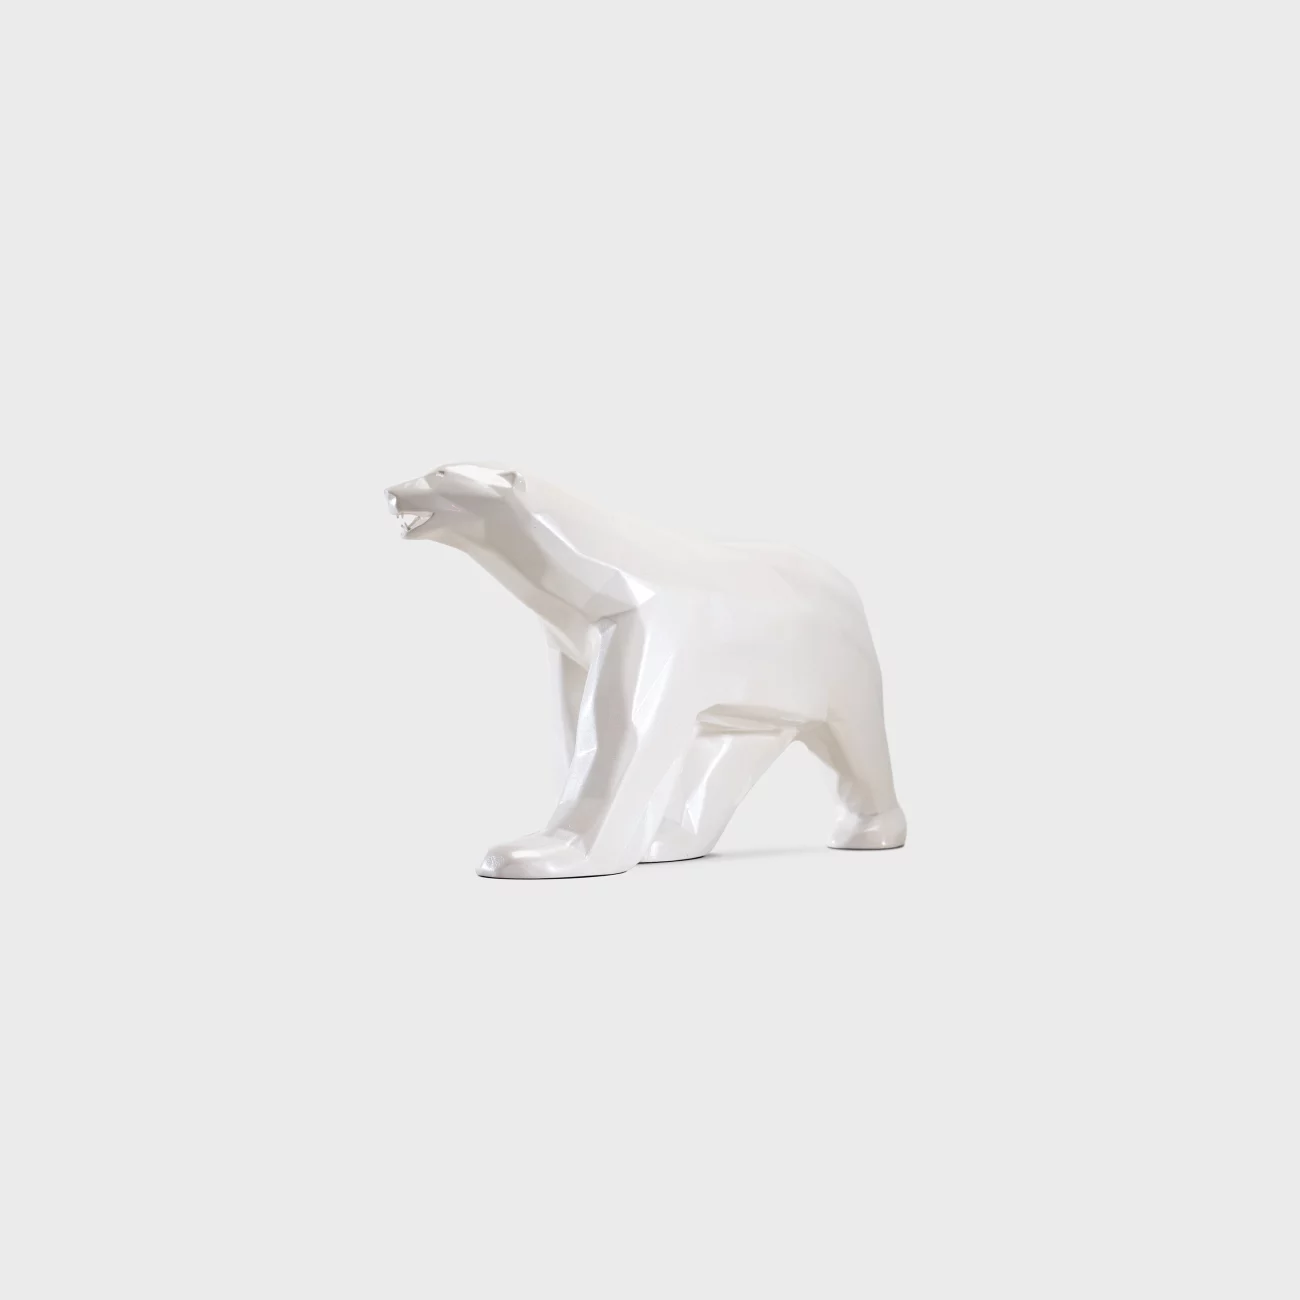 L'Ours Pompon pearly by Richard Orlinski inspired by François Pompon white polar bear - Orlinski edition museum in partnership with Artémus